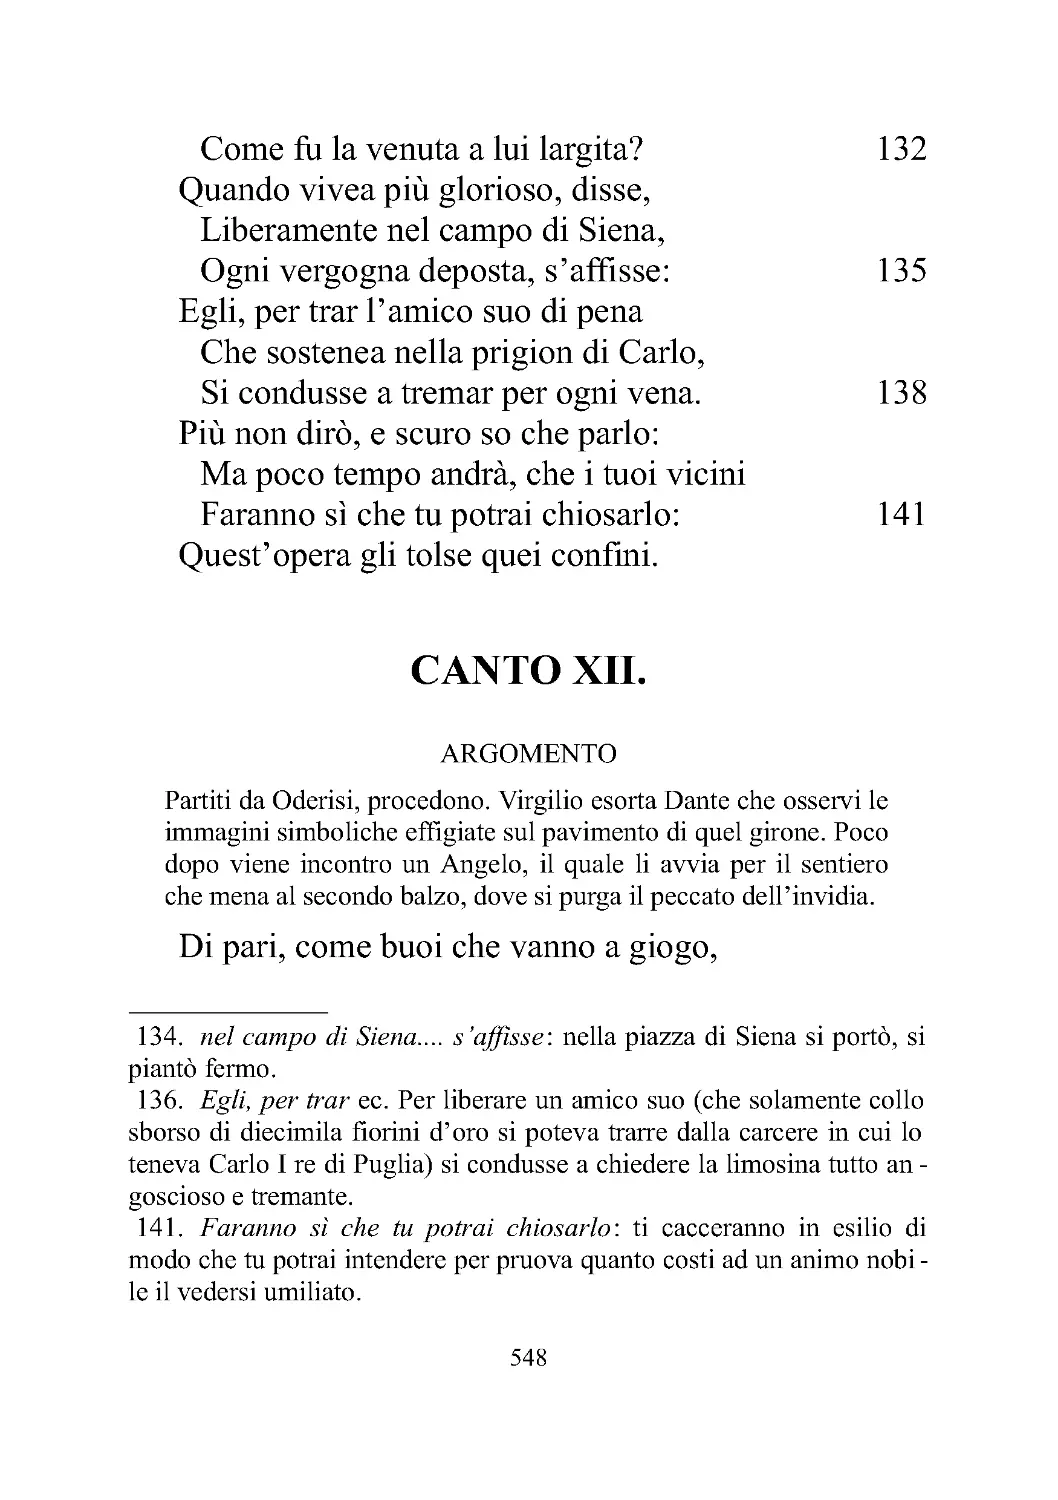 CANTO XII.